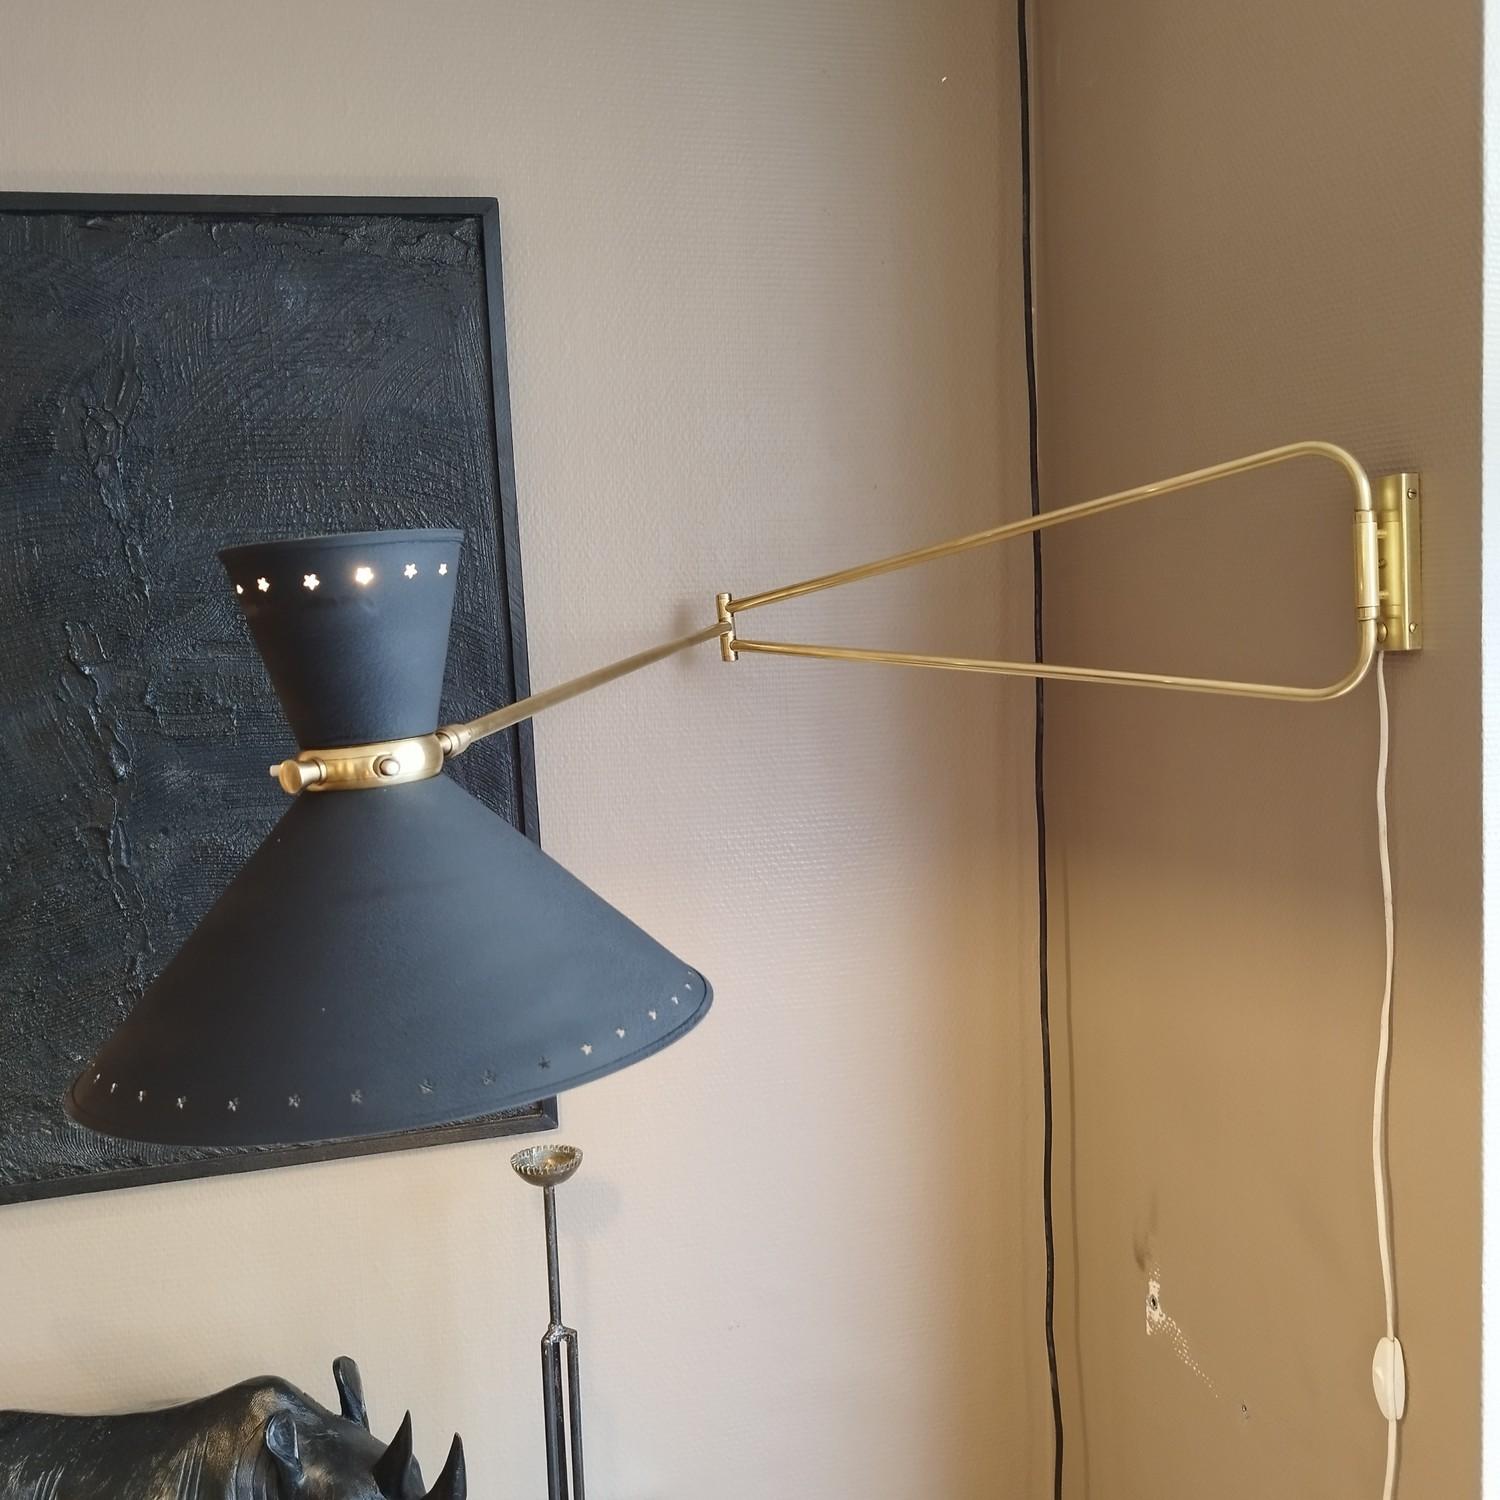 This is the large model of this articulated sconce with 2 lights. 2 switchs on the rim allow to turn on or off each light bulb (baionnett). It has been entirely cleaned and the wired has been checked.